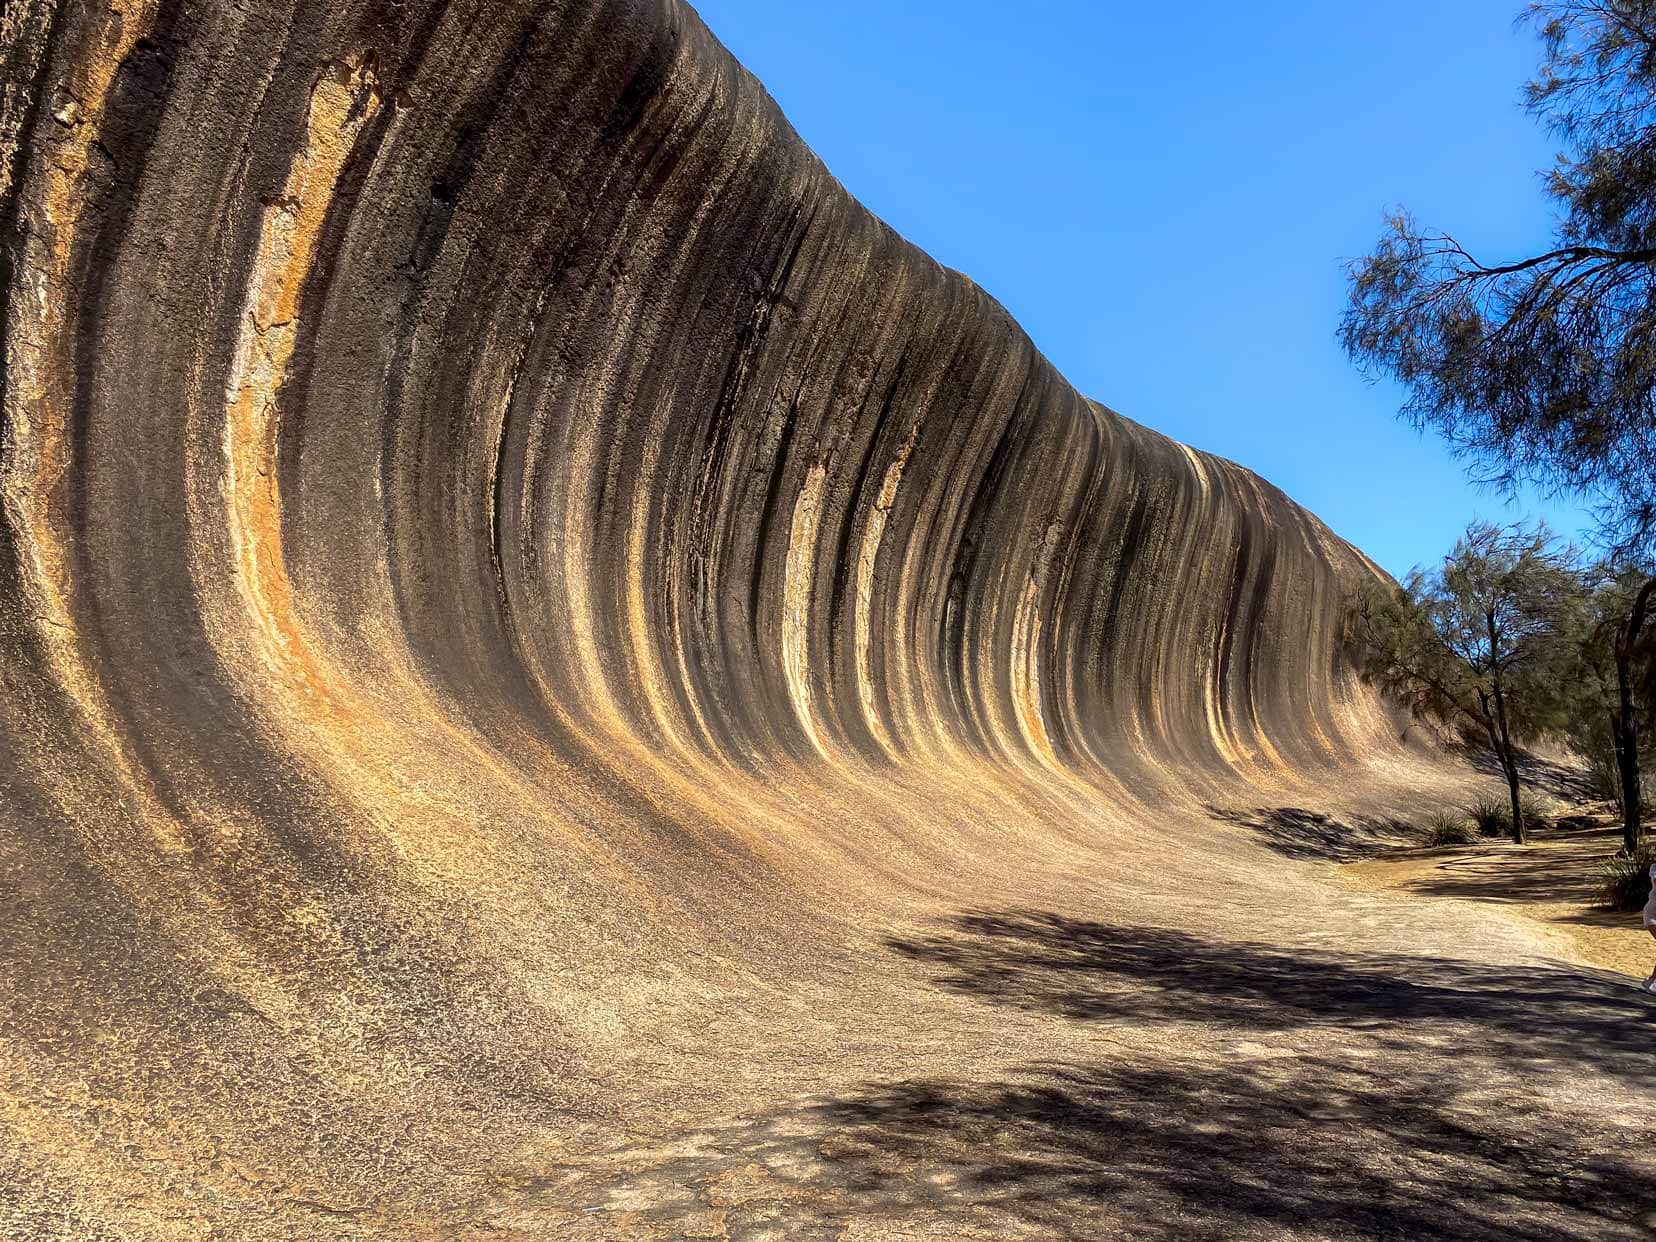 Perth to Wave Rock Wave-Rock- showing the length of the wave shaped rock